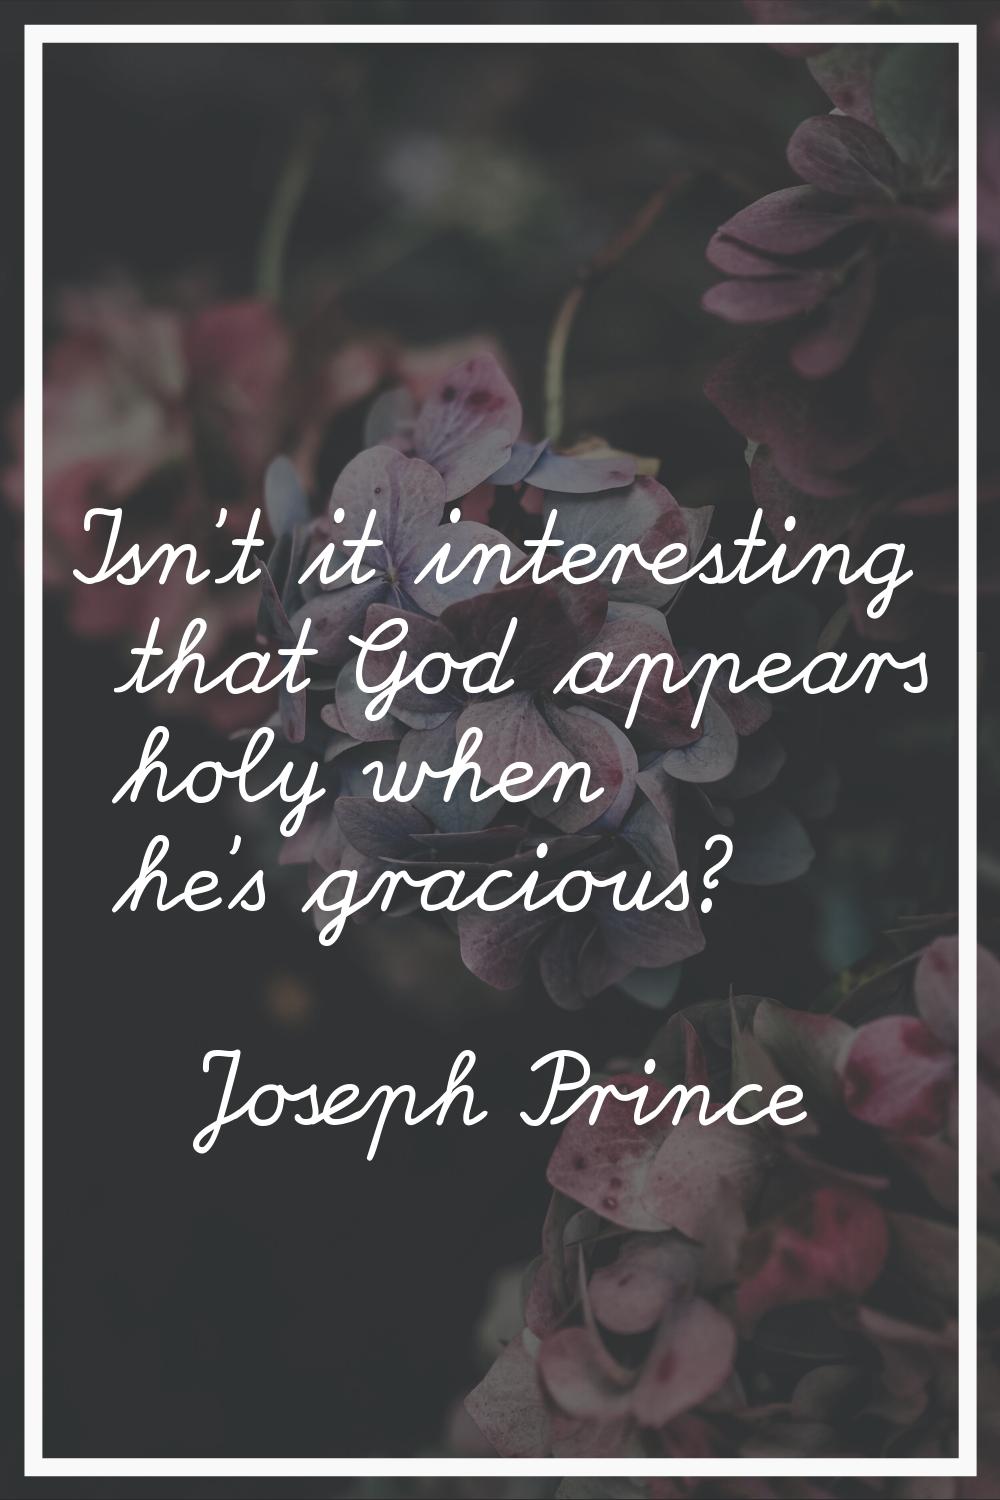 Isn't it interesting that God appears holy when he's gracious?